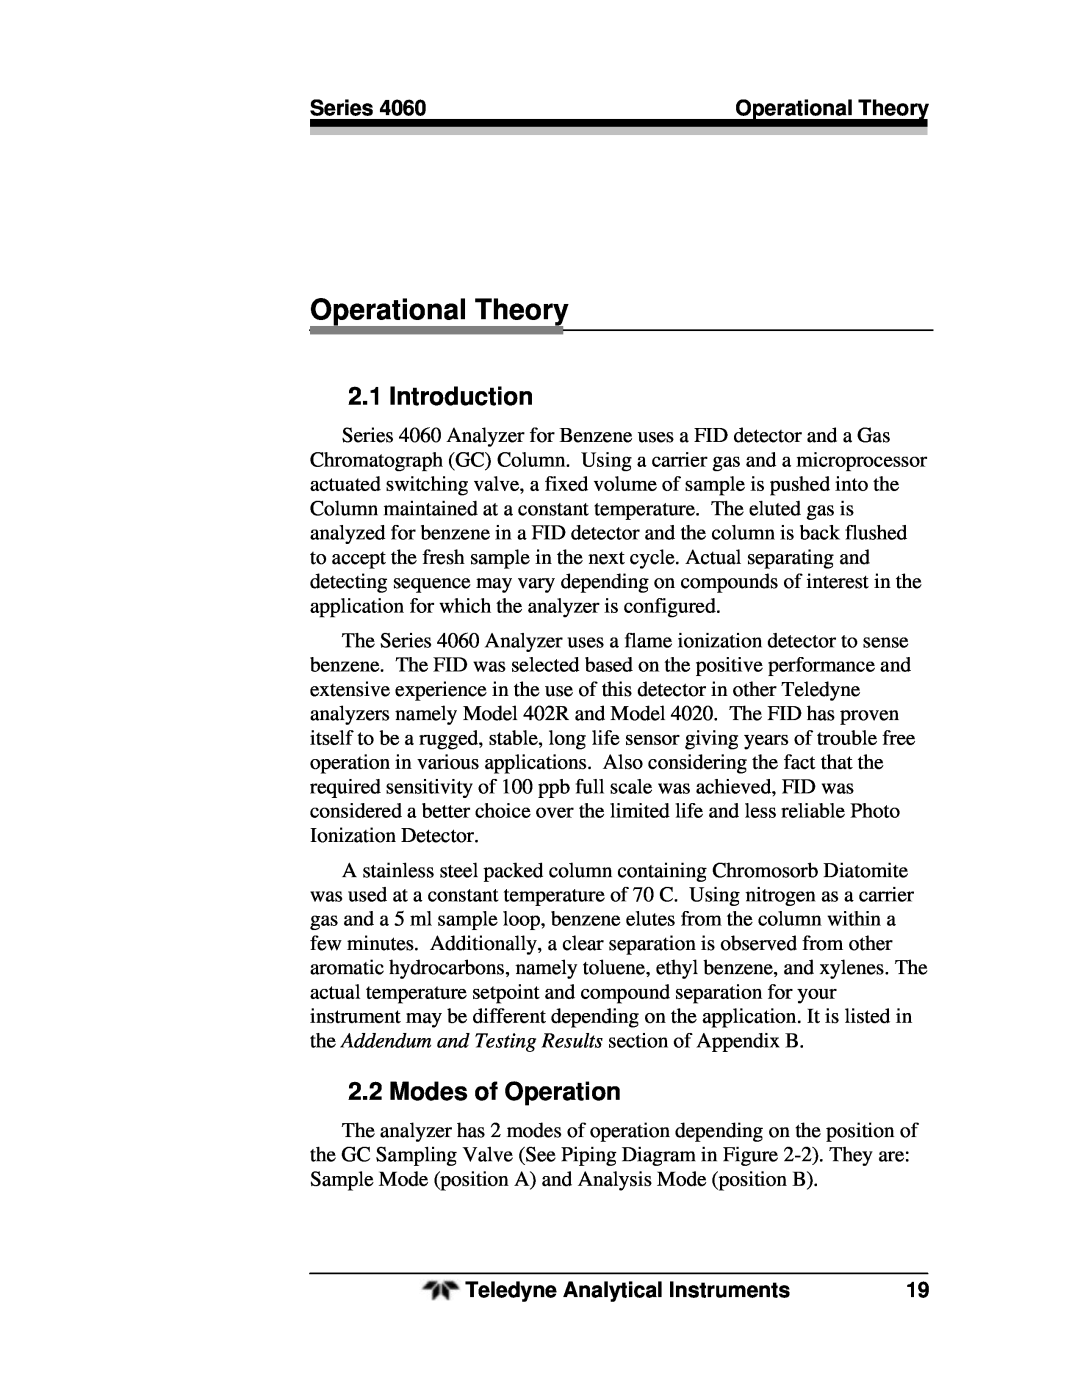 Teledyne 4060 manual Operational Theory, Introduction, Modes of Operation 